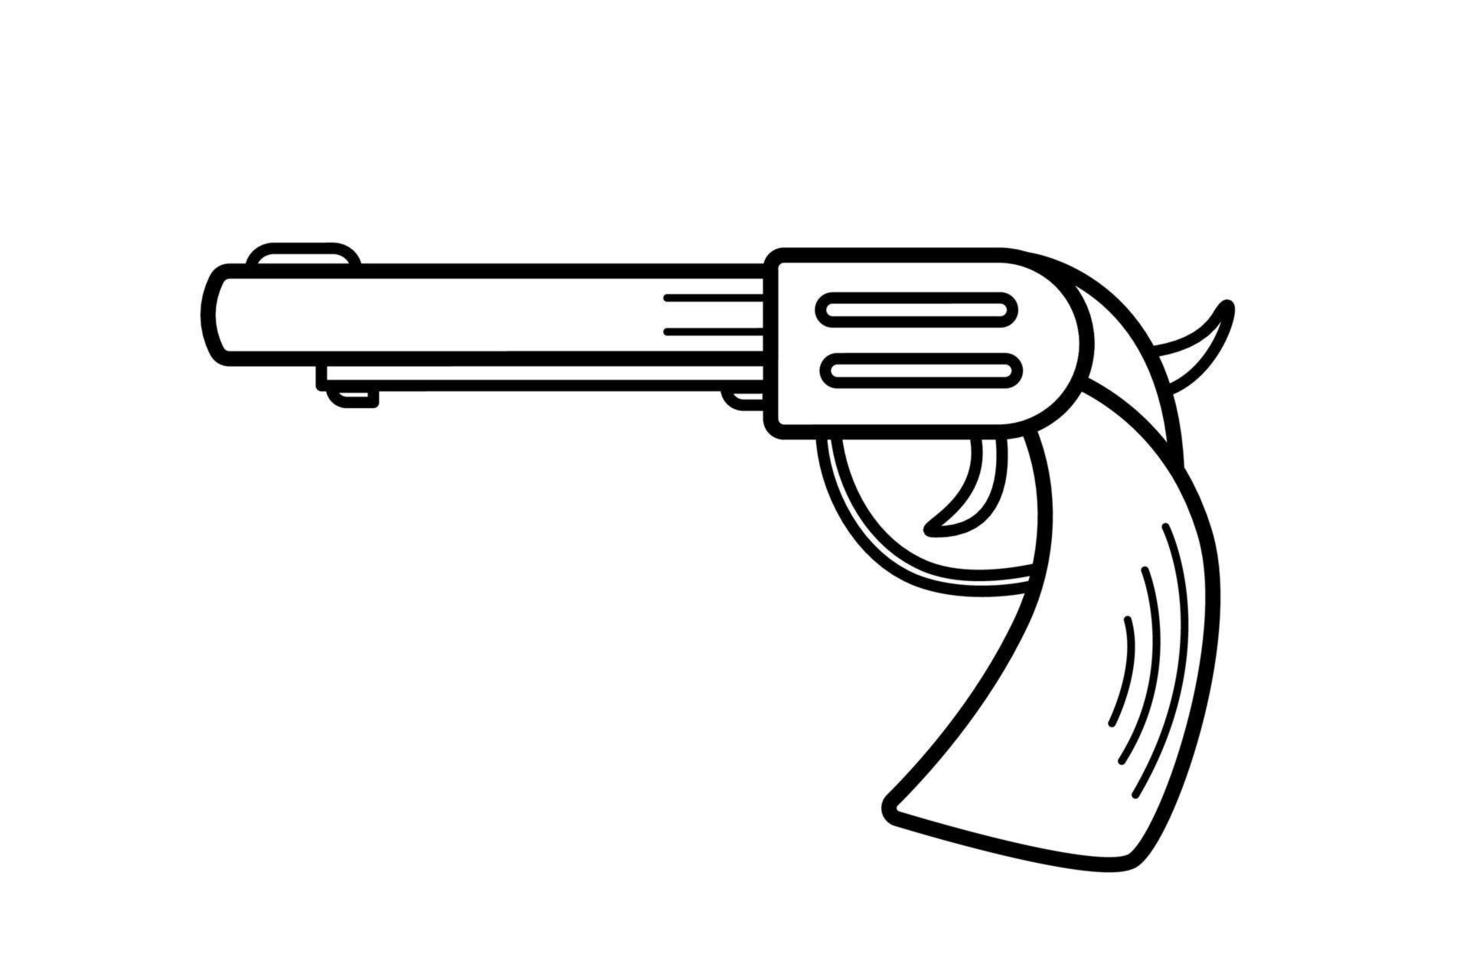 Gun icon in western style. Vector illustration of a revolver doodle element isolated on white.